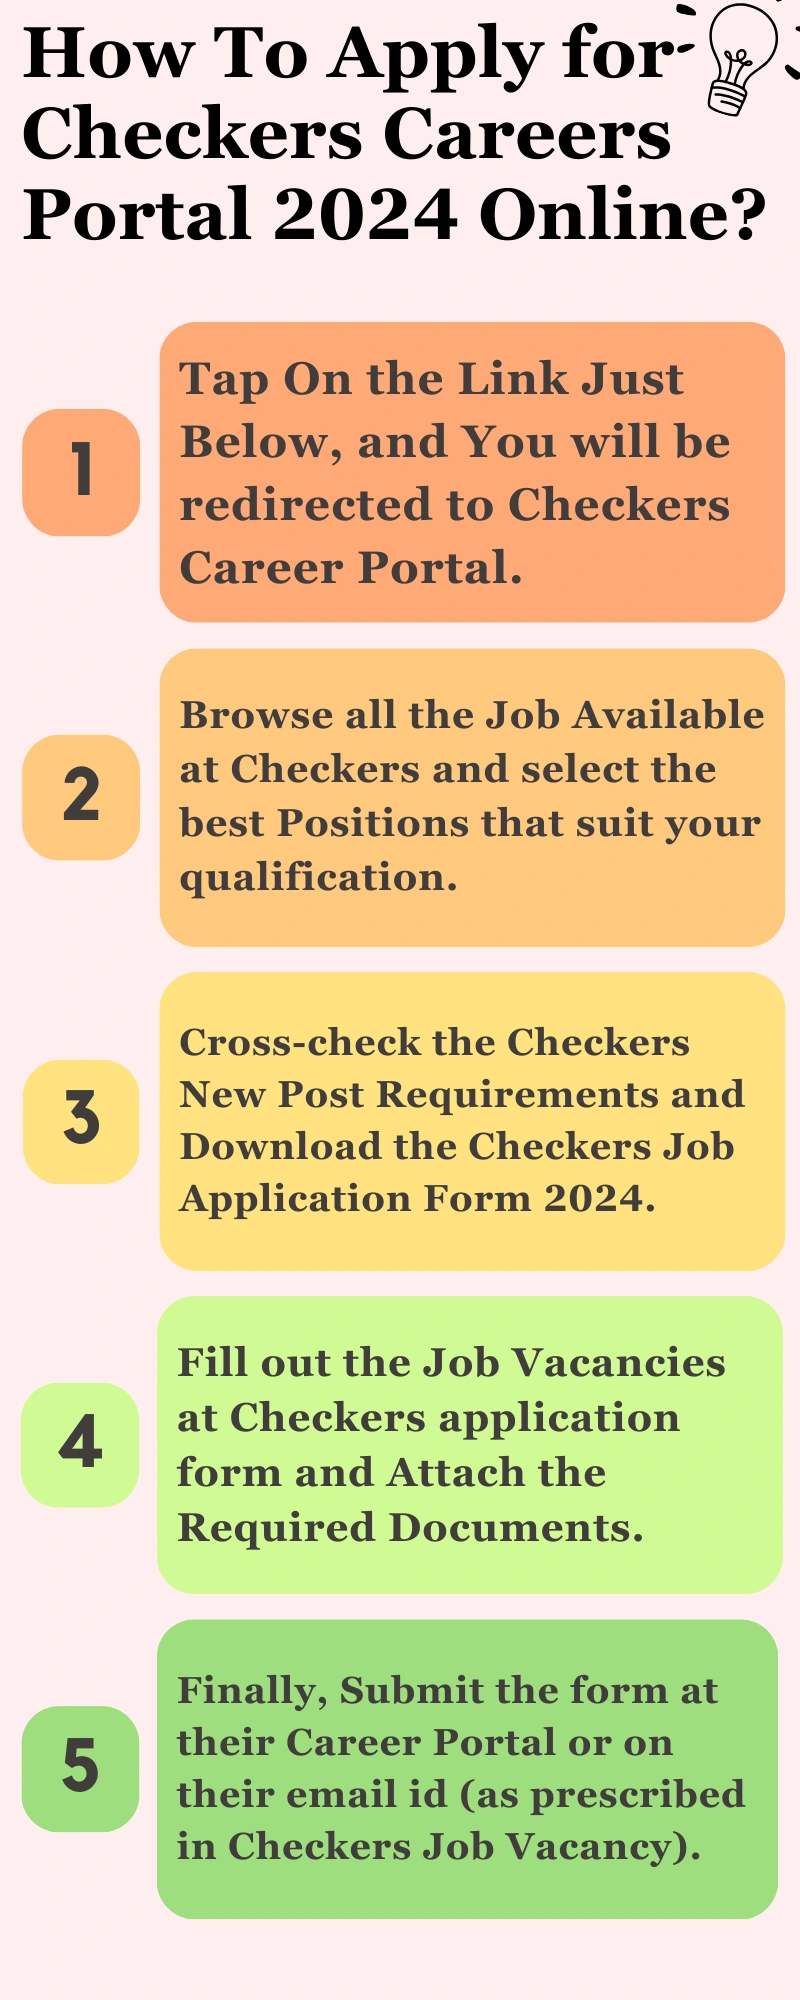 How To Apply for Checkers Careers Portal 2024 Online?